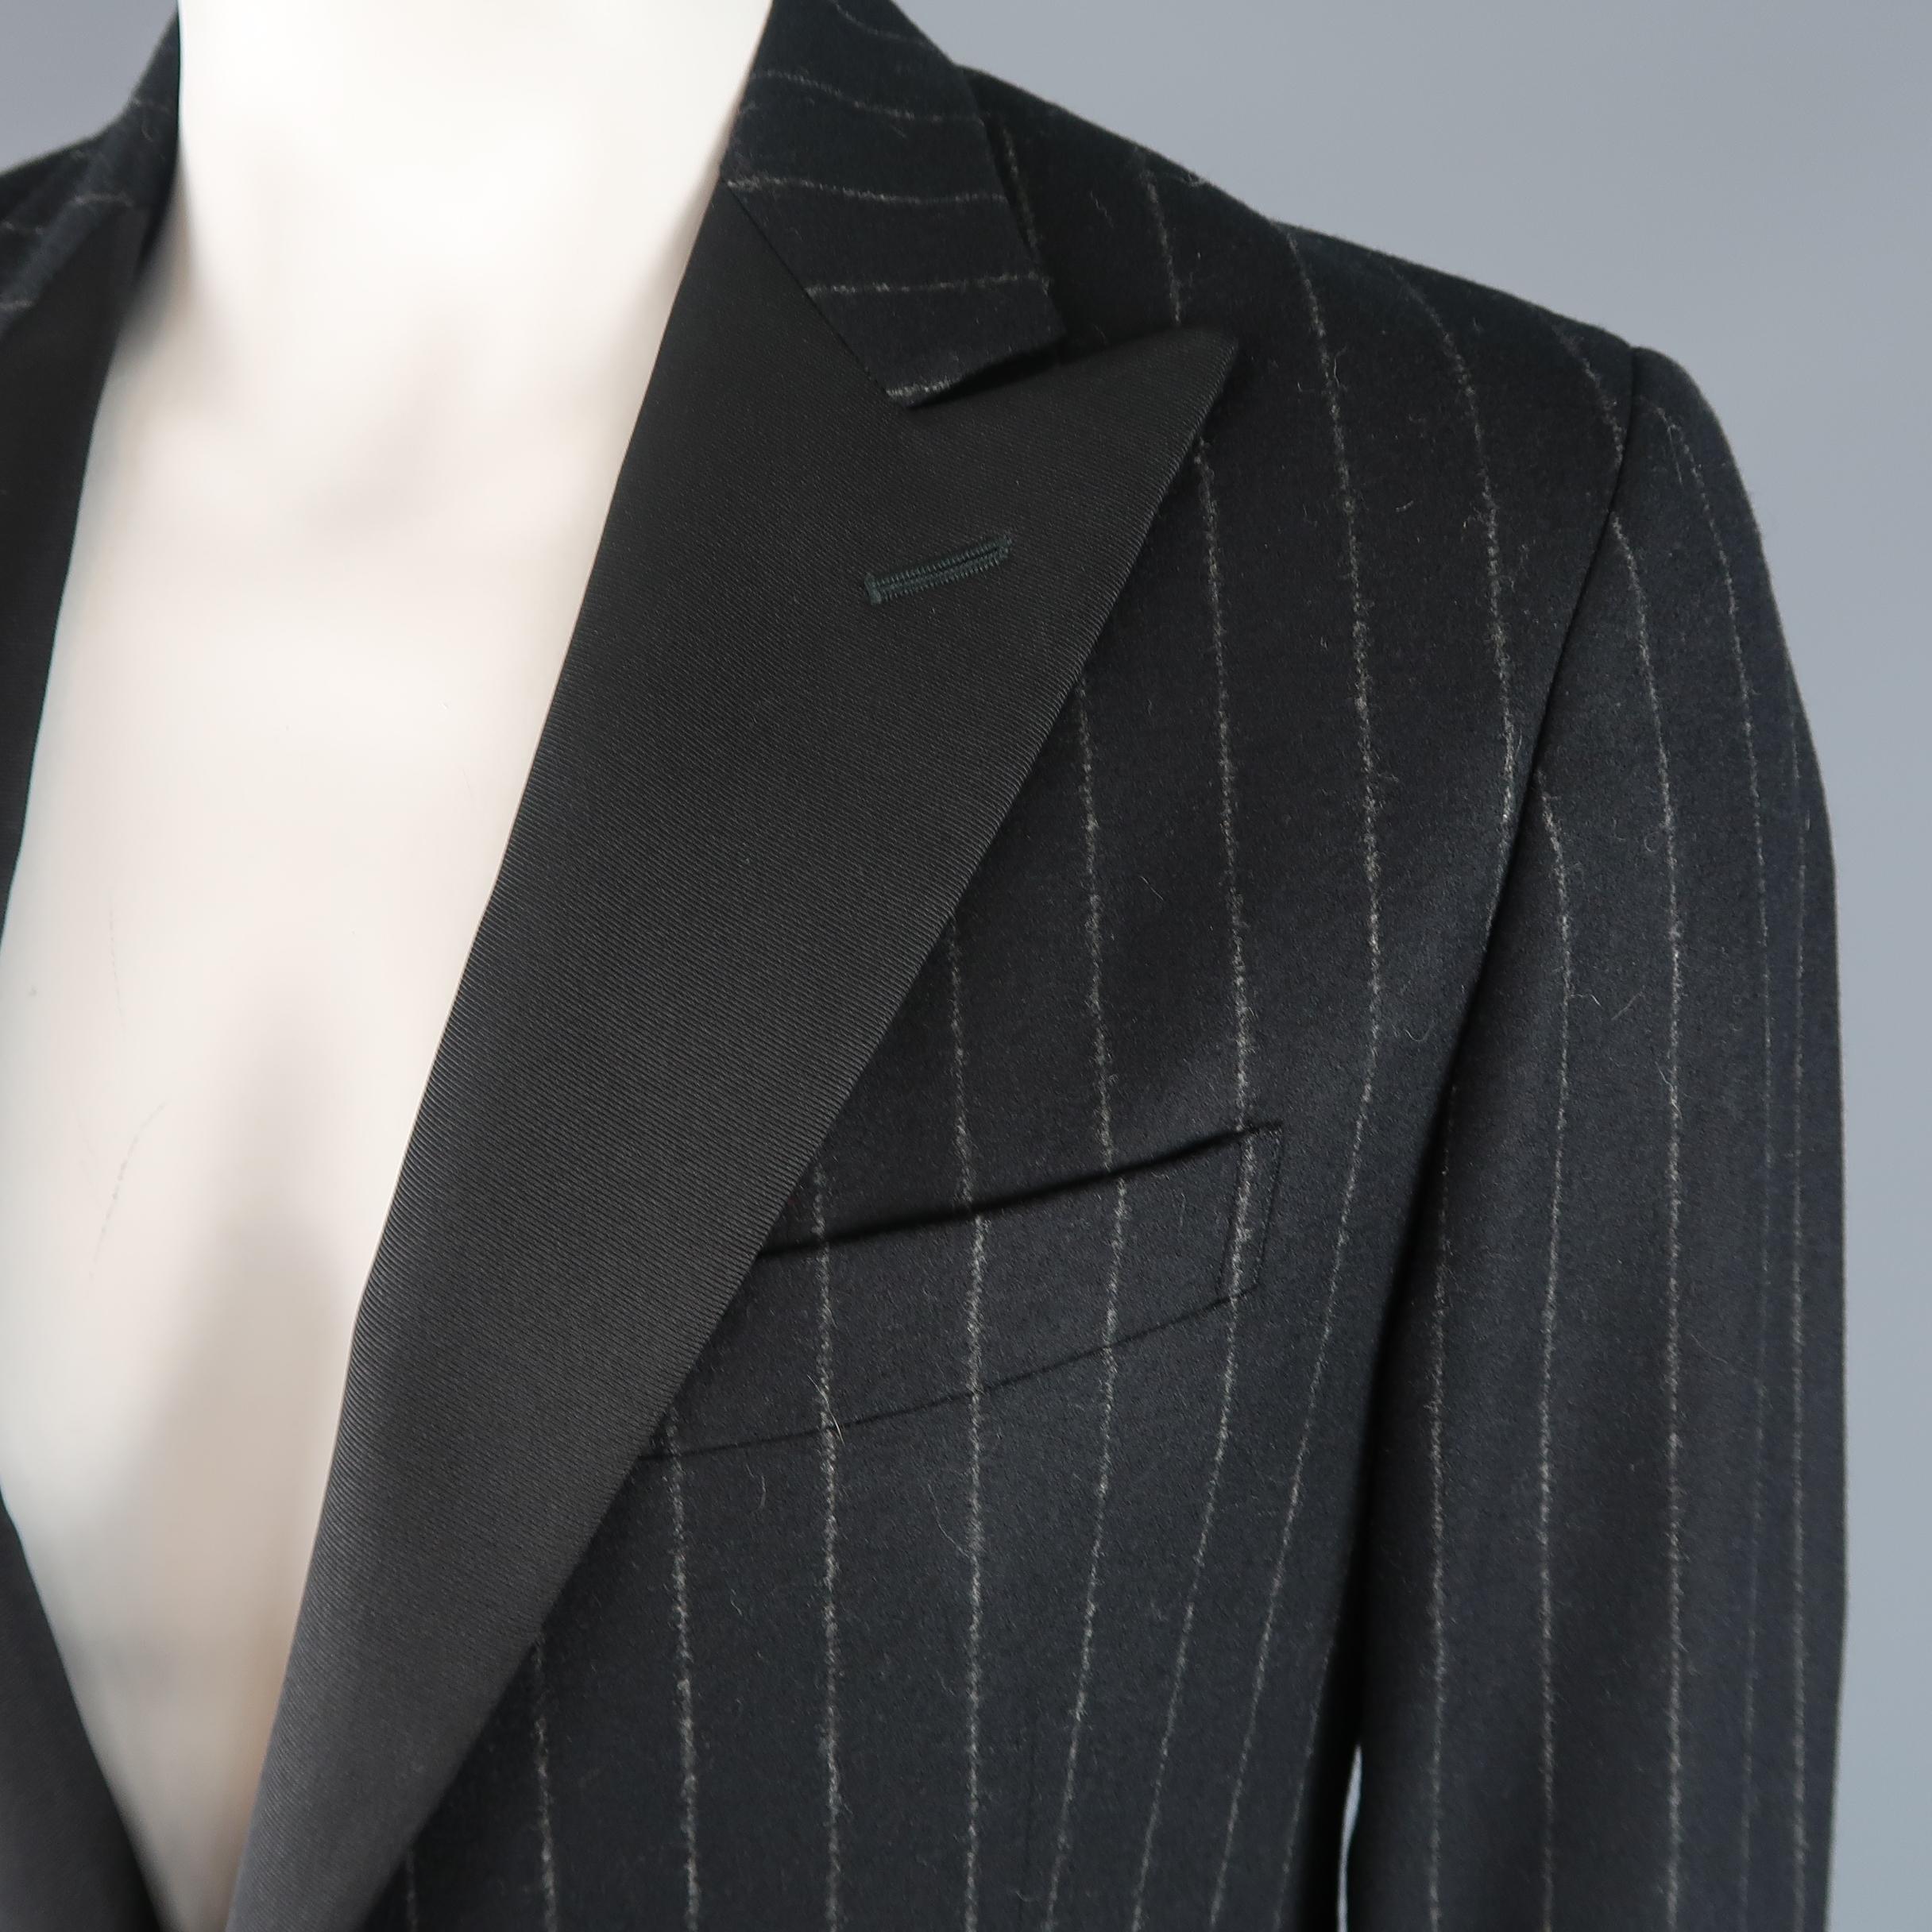 POLO RALPH  LAUREN sport coat comes in black chalkstripe wool cashmere with a single fabric button and faille tuxedo style peak lapel. Made in Italy.
Retail: $1200.00
Excellent Pre-Owned Condition.
Marked: 42
 
Measurements:
    Shoulder: 18 in.
   